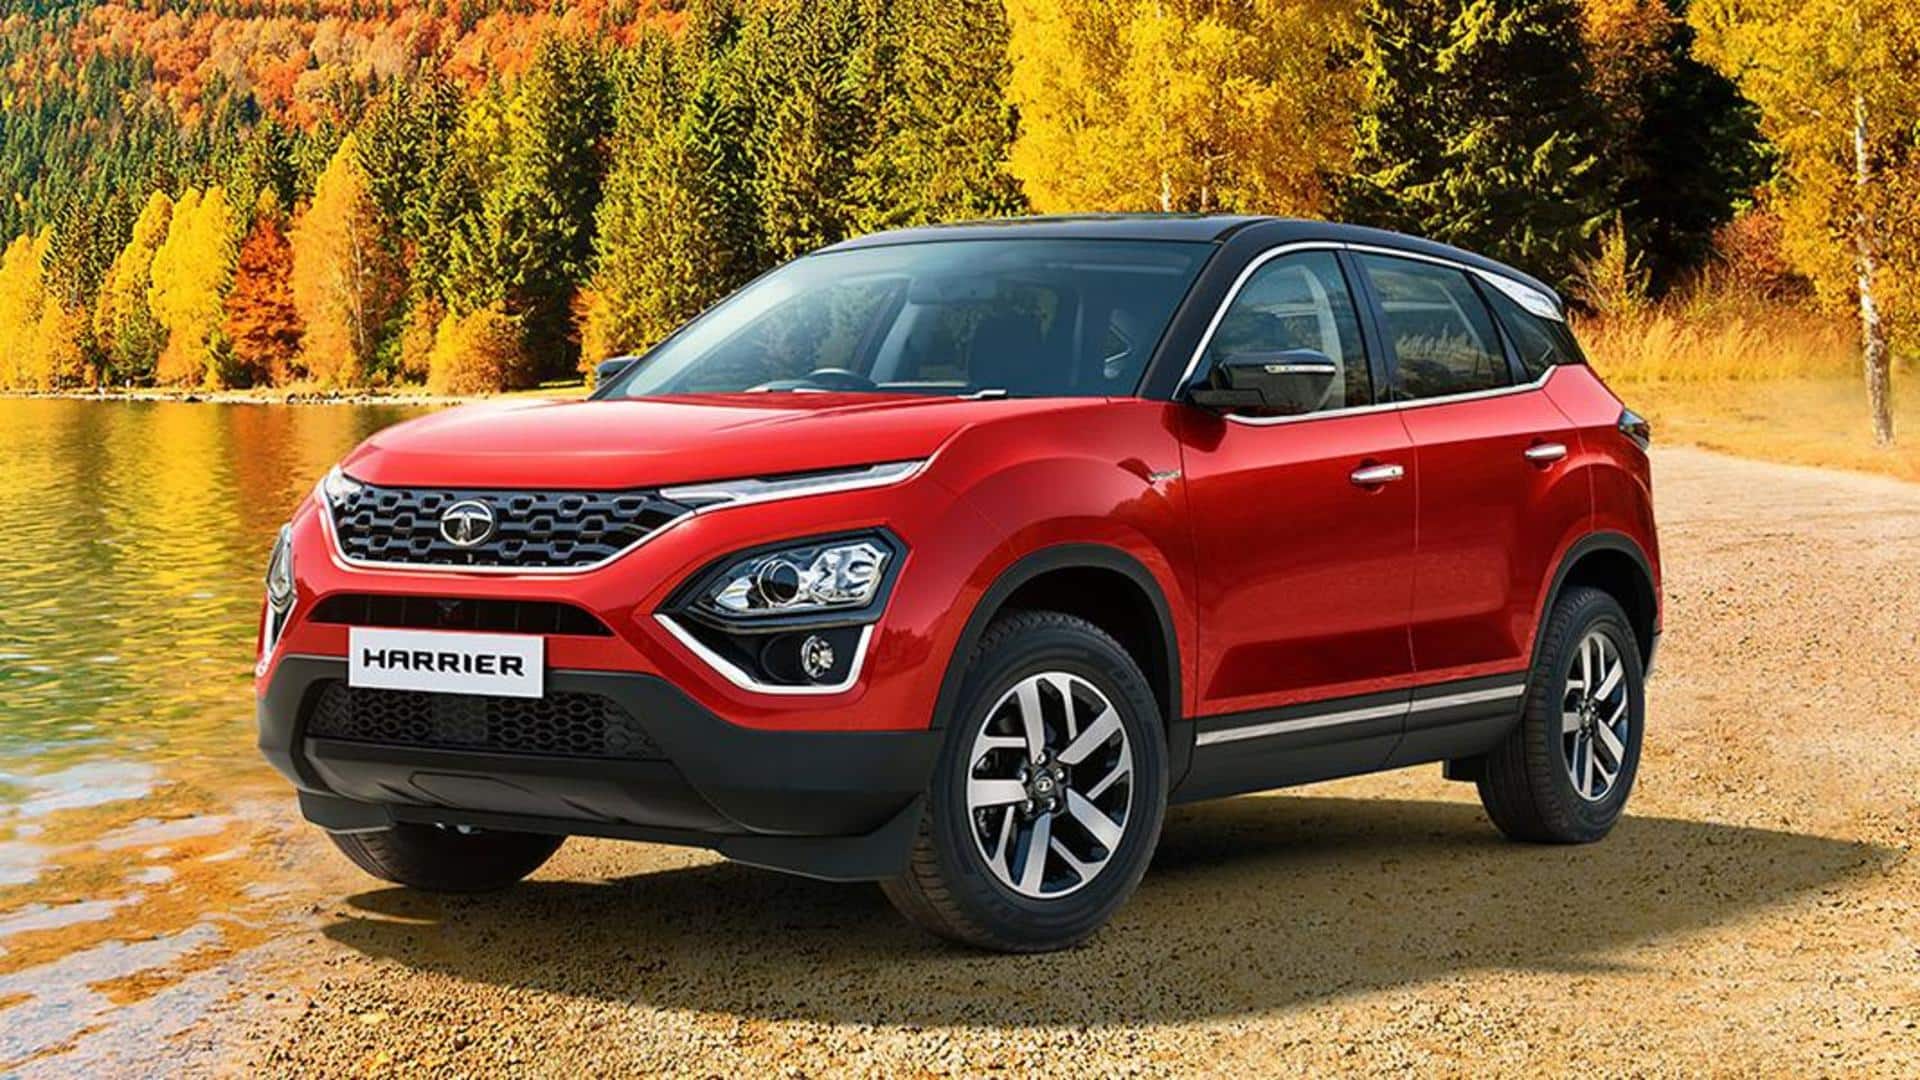 2023 Tata Harrier goes official in India: Check top features